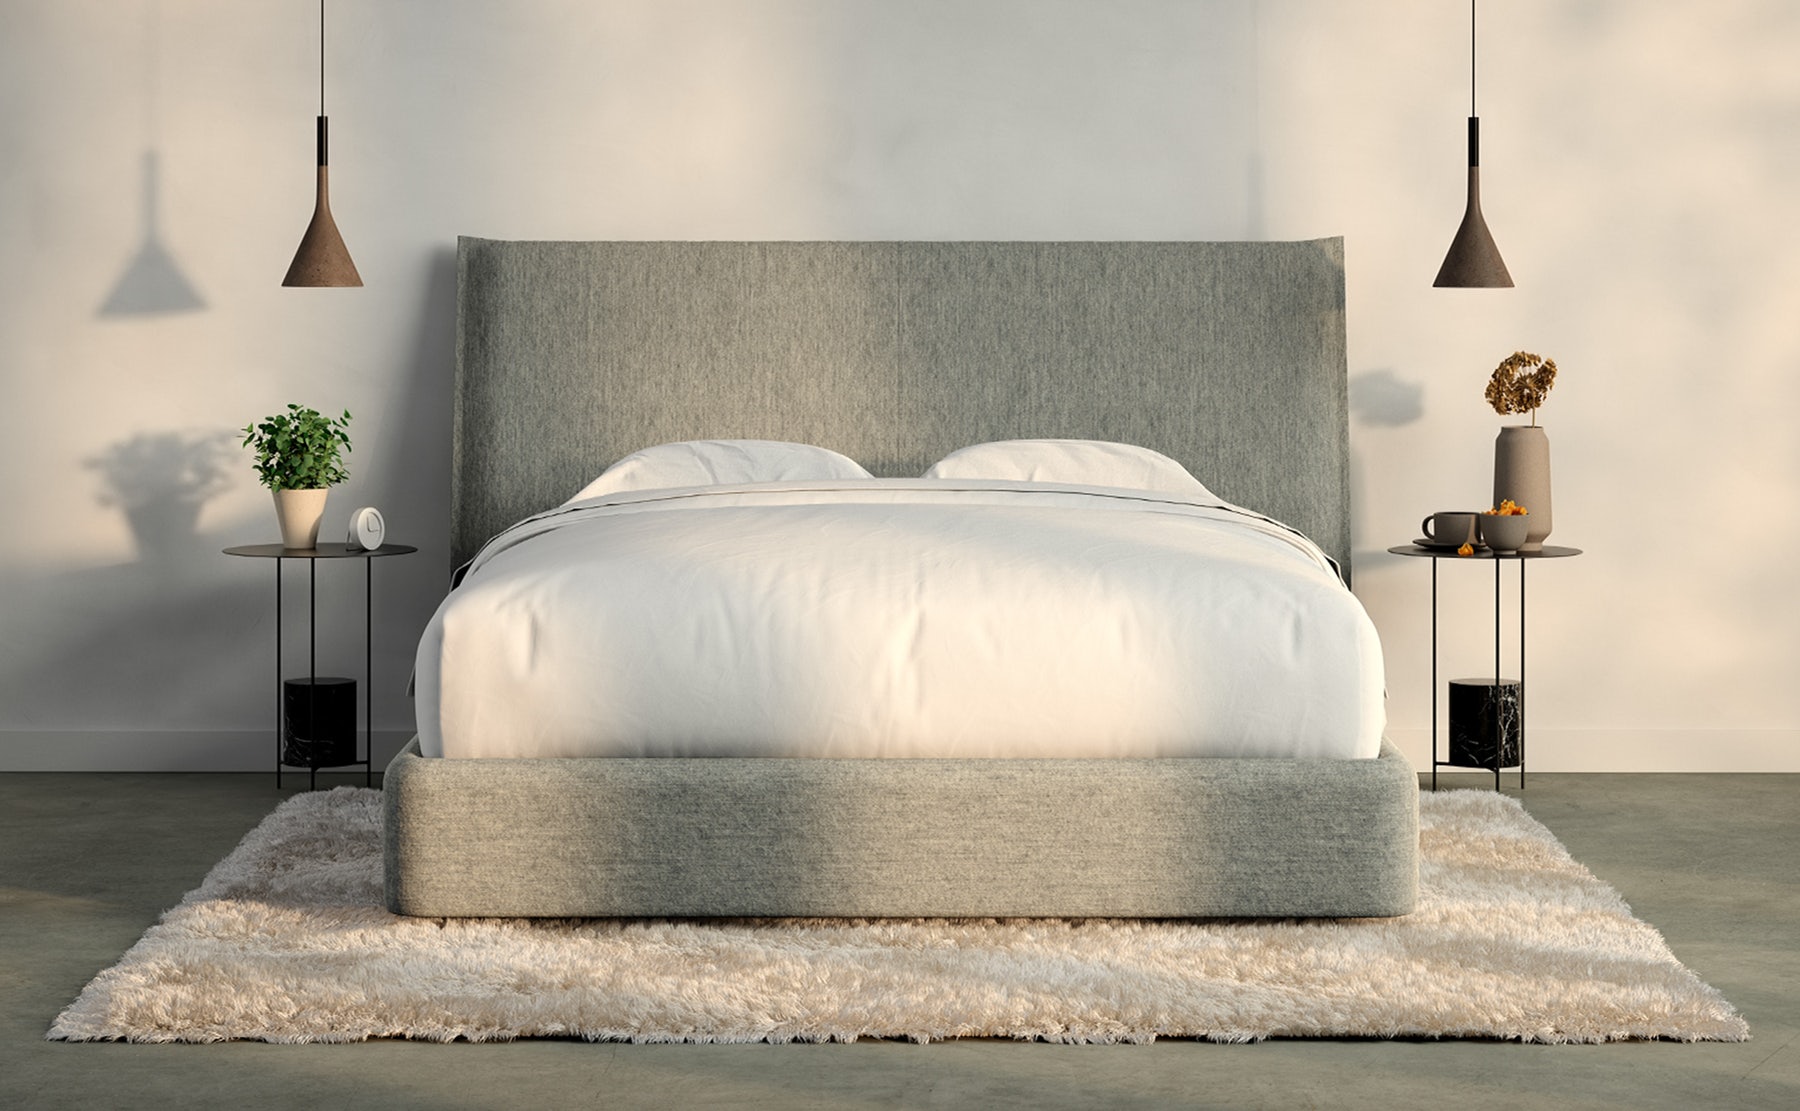 Mattress Sizes And Bed Dimensions Guide, What Size Bed Frame For A Full Xl